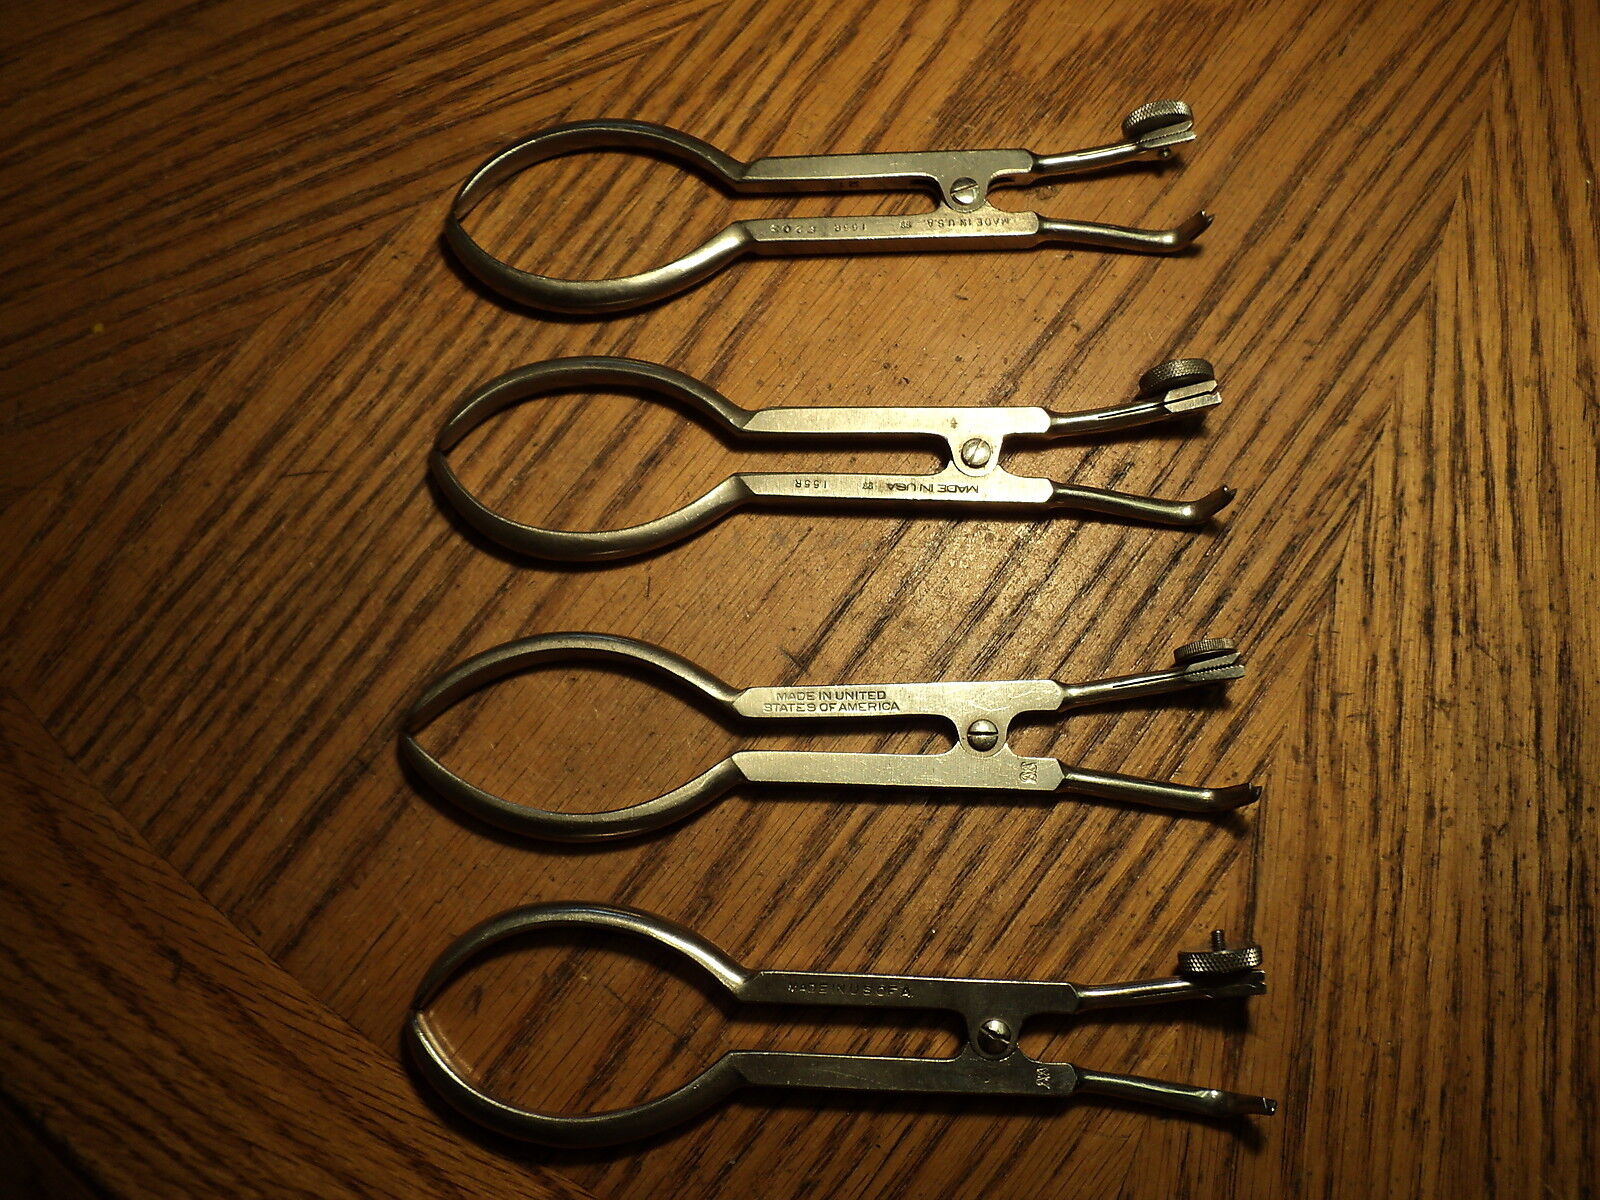 Vintage White Rubber Dam Clamp Forcepts Orthodontic Tool No. 155R 3 Designs 4 pc